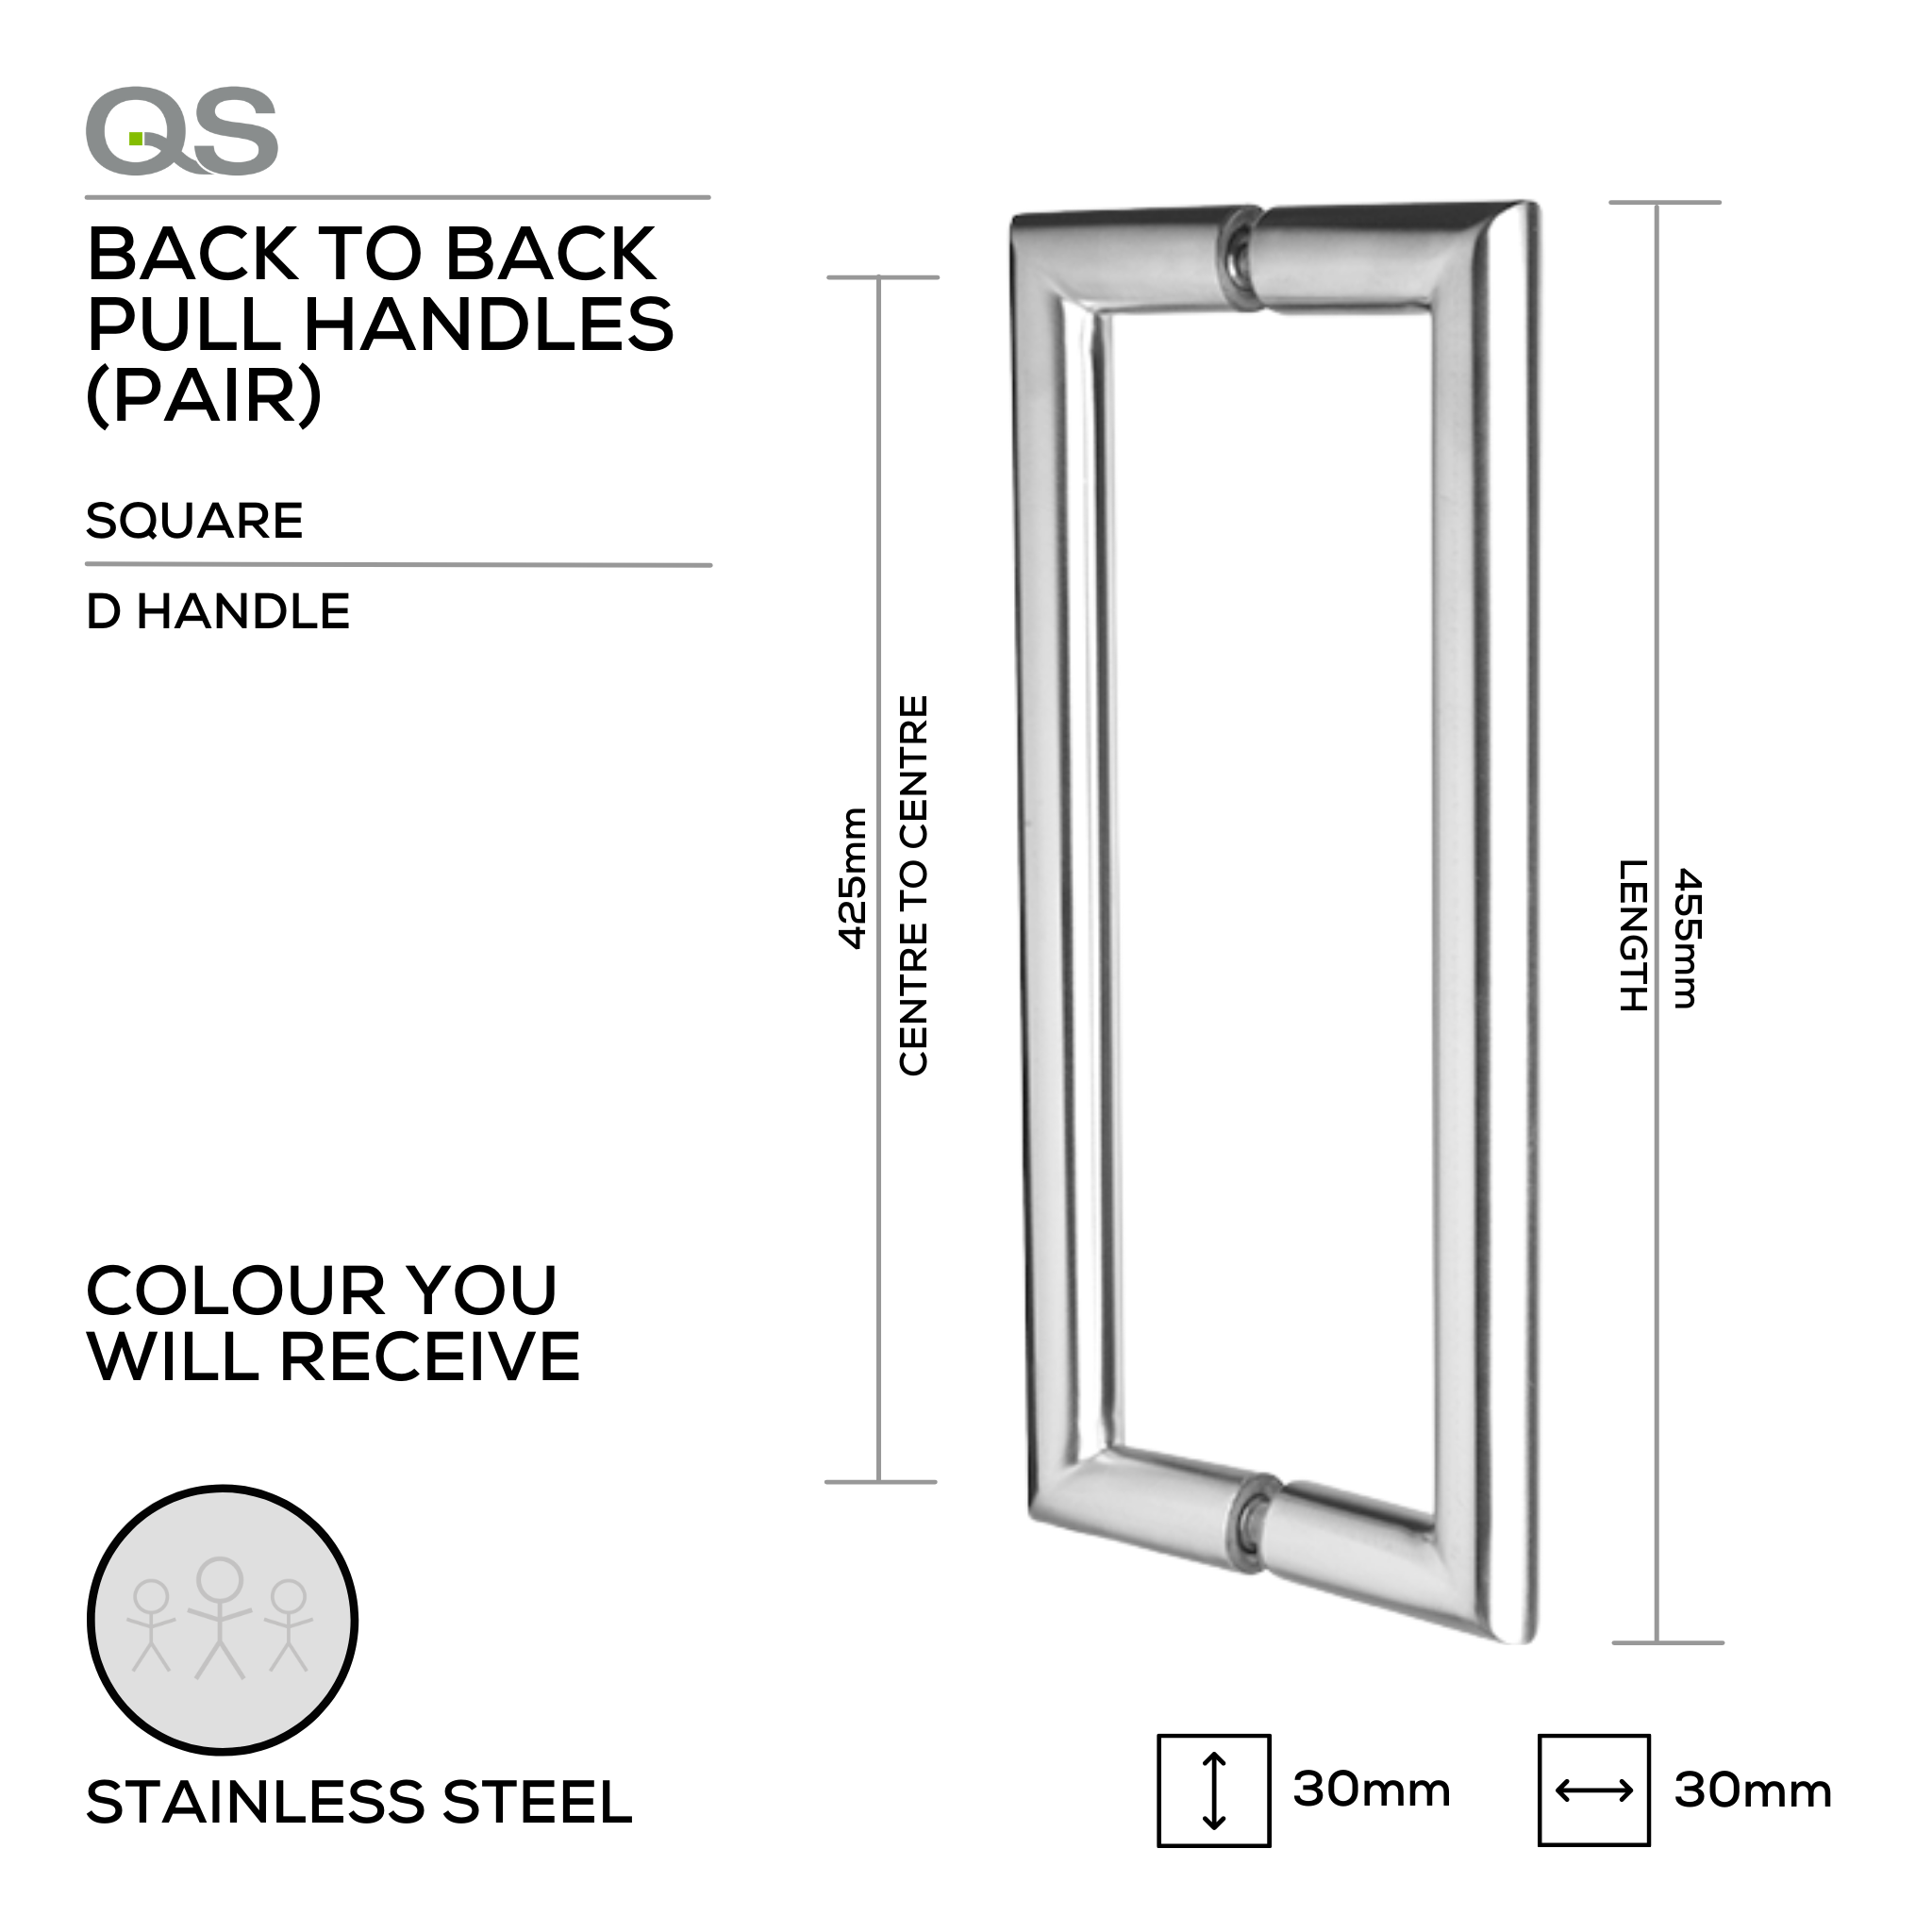 QS2601 Square D, Pull Handle, Square, D Handle, BTB, 30mm (d) x 455mm (l) x 425mm (ctc), Stainless Steel, QS